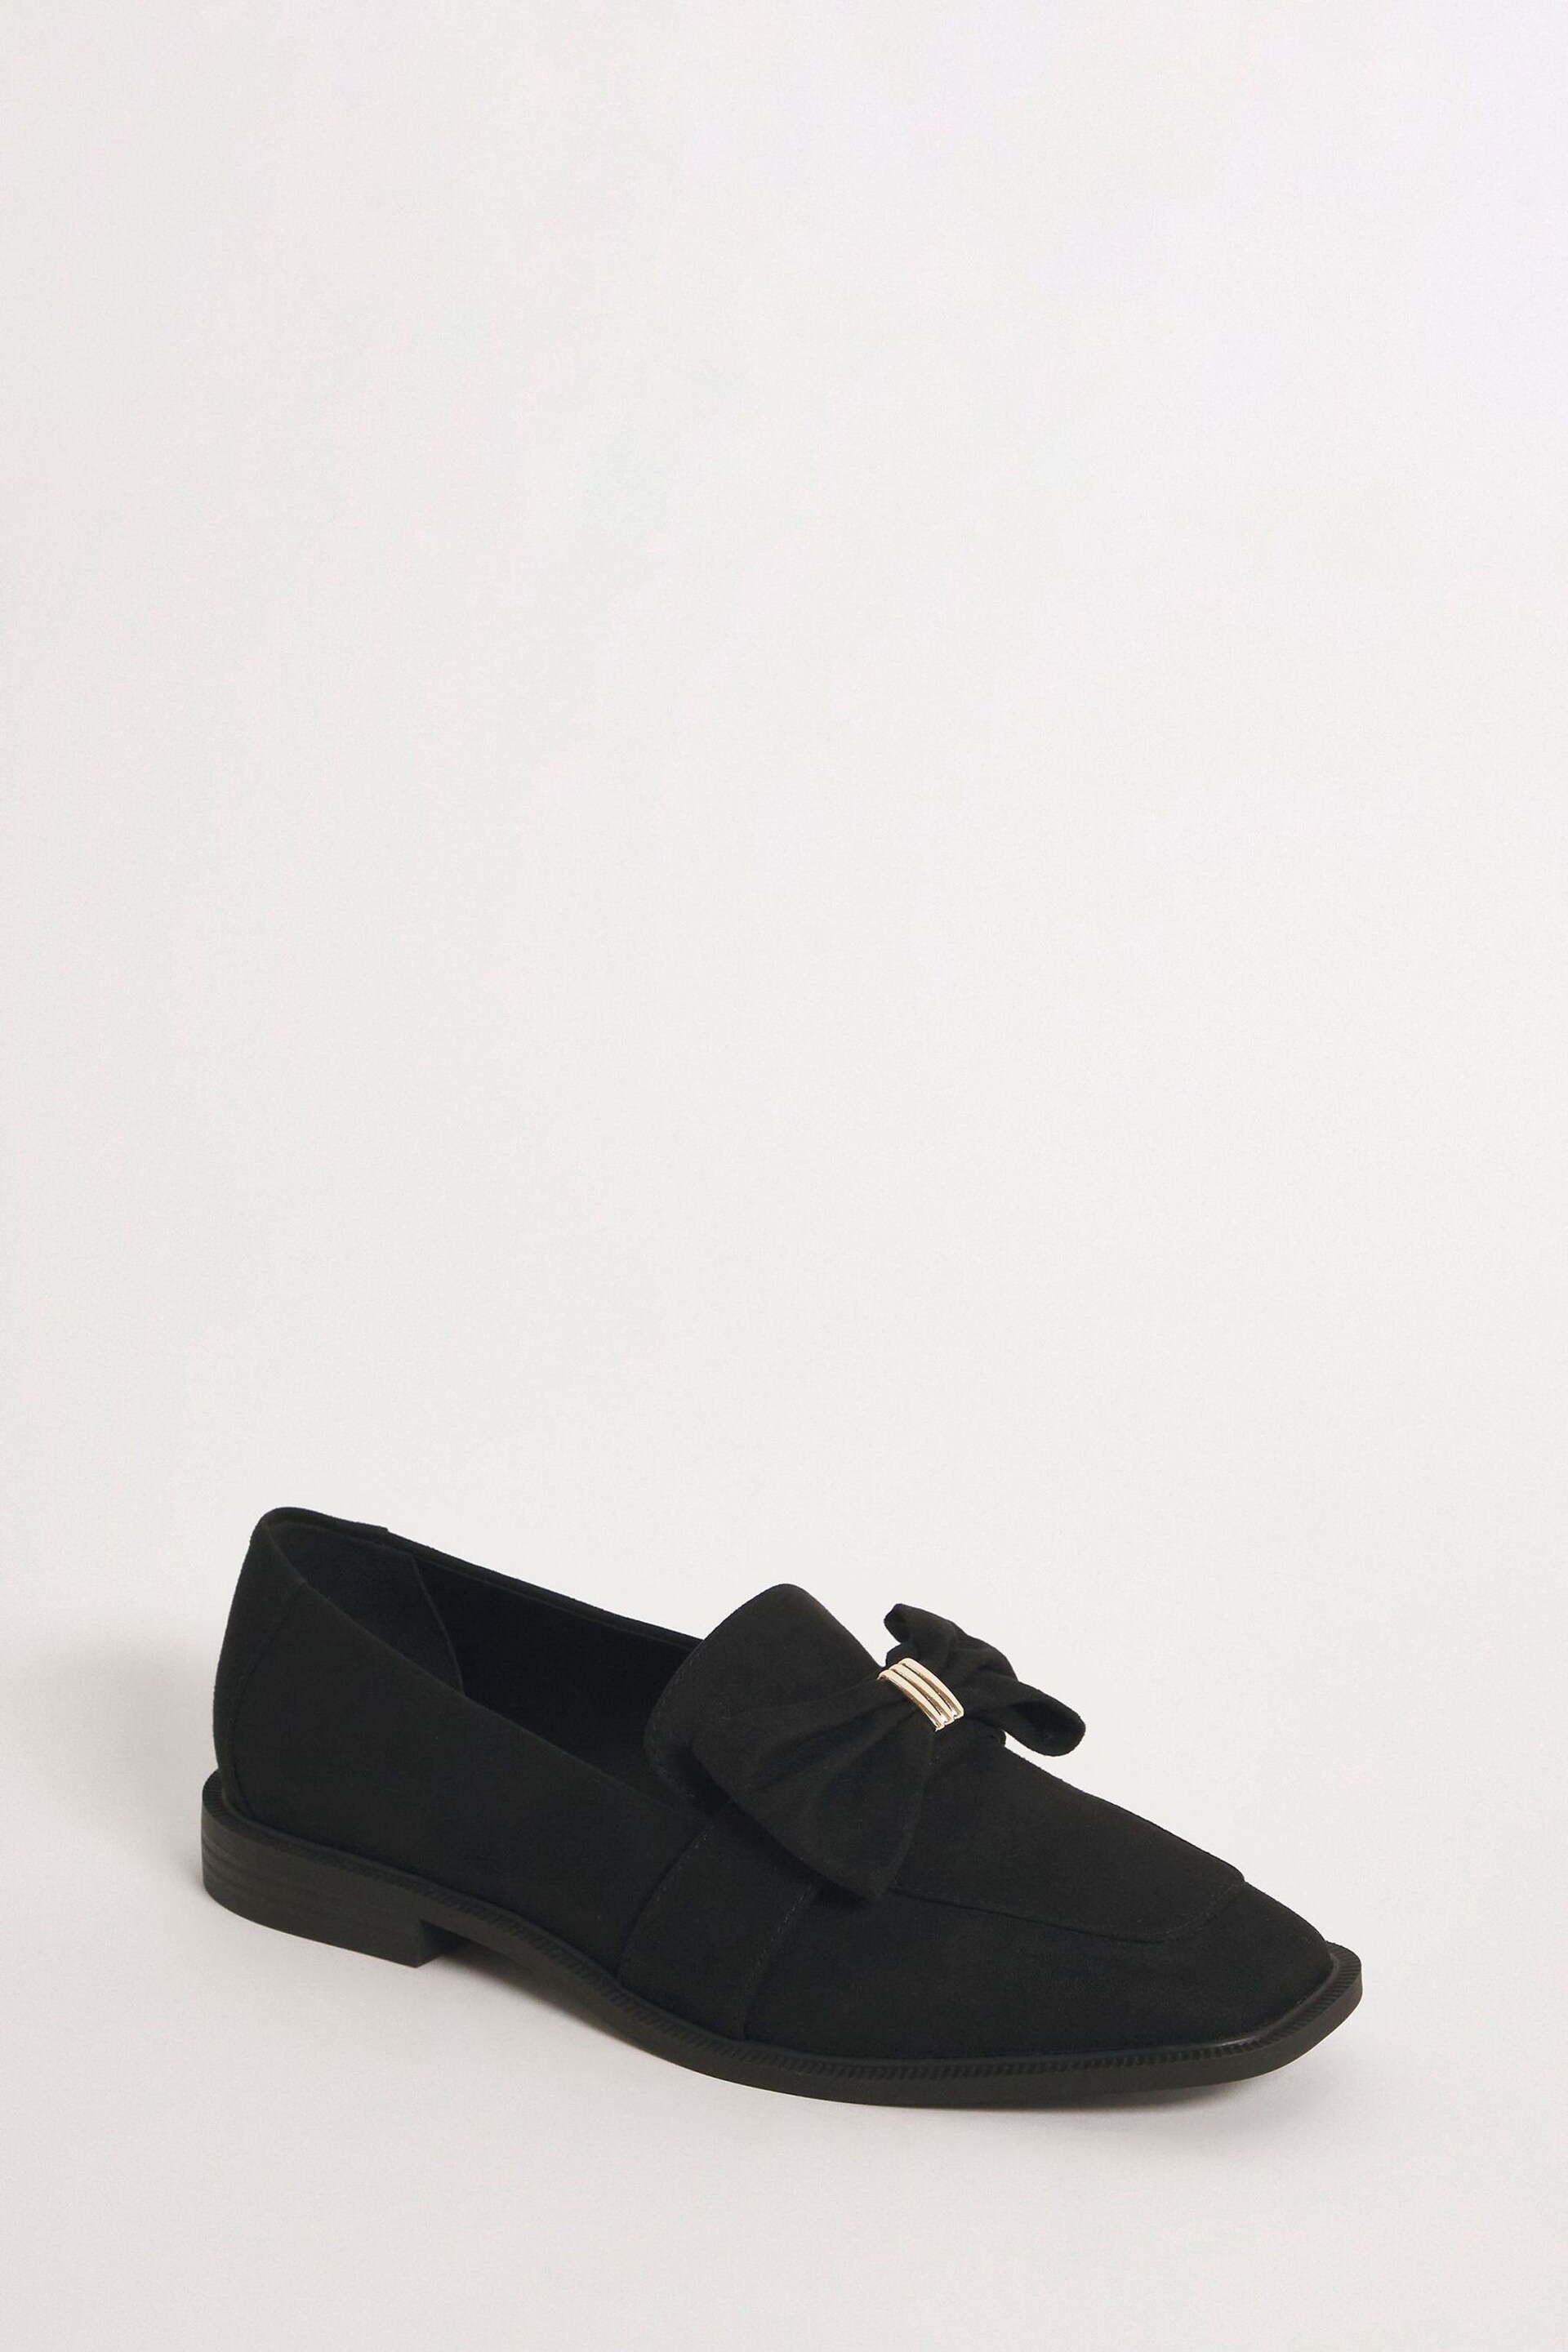 Simply Be Black Regular/Wide Fit Classic Loafers With Bow Trim - Image 2 of 3